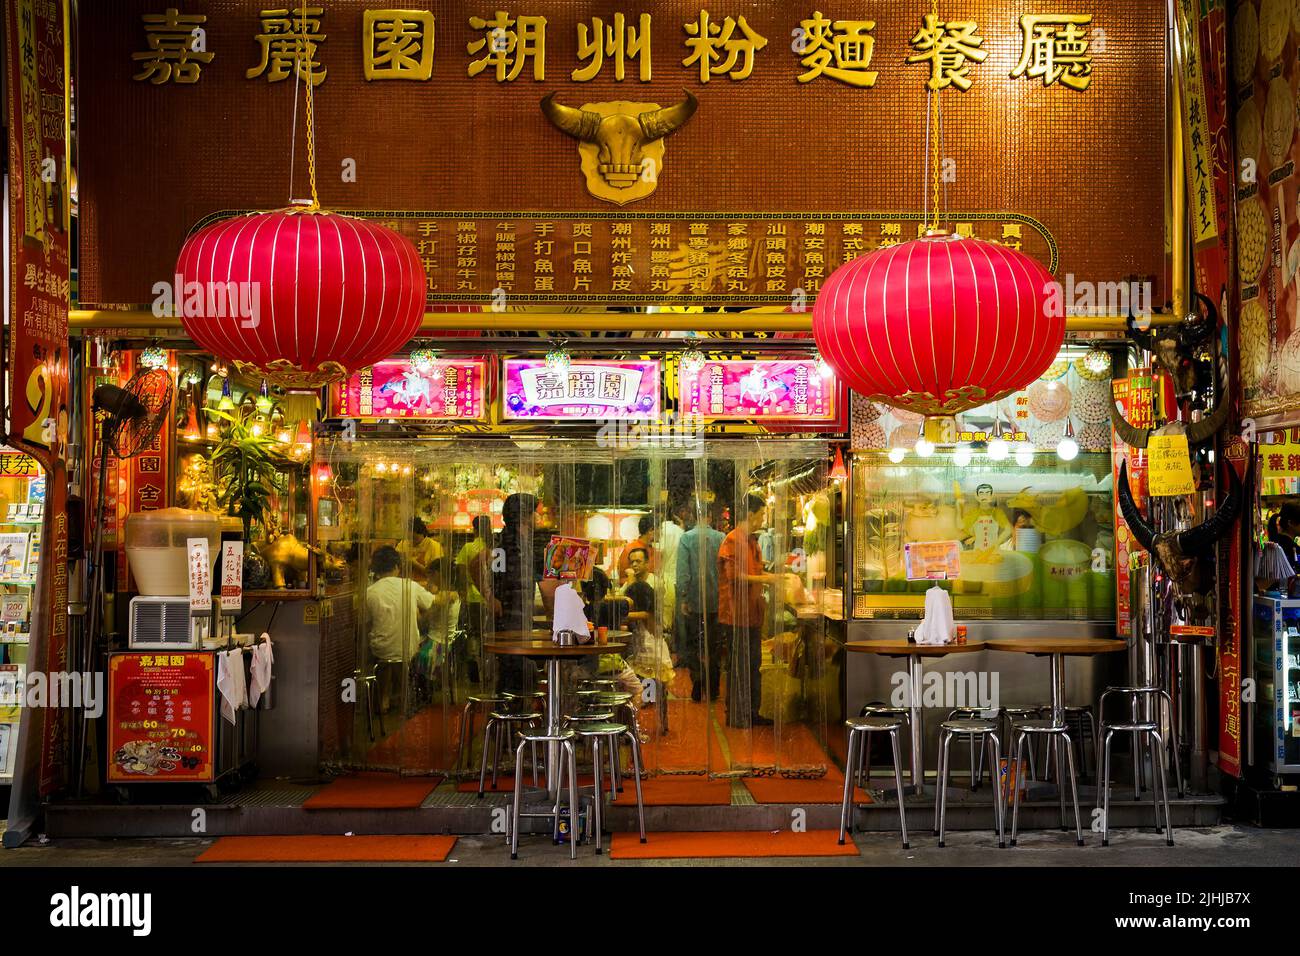 Specialist restaurant serving buffalo meat dishes in Yuen Long, New Territories, Hong Kong Stock Photo